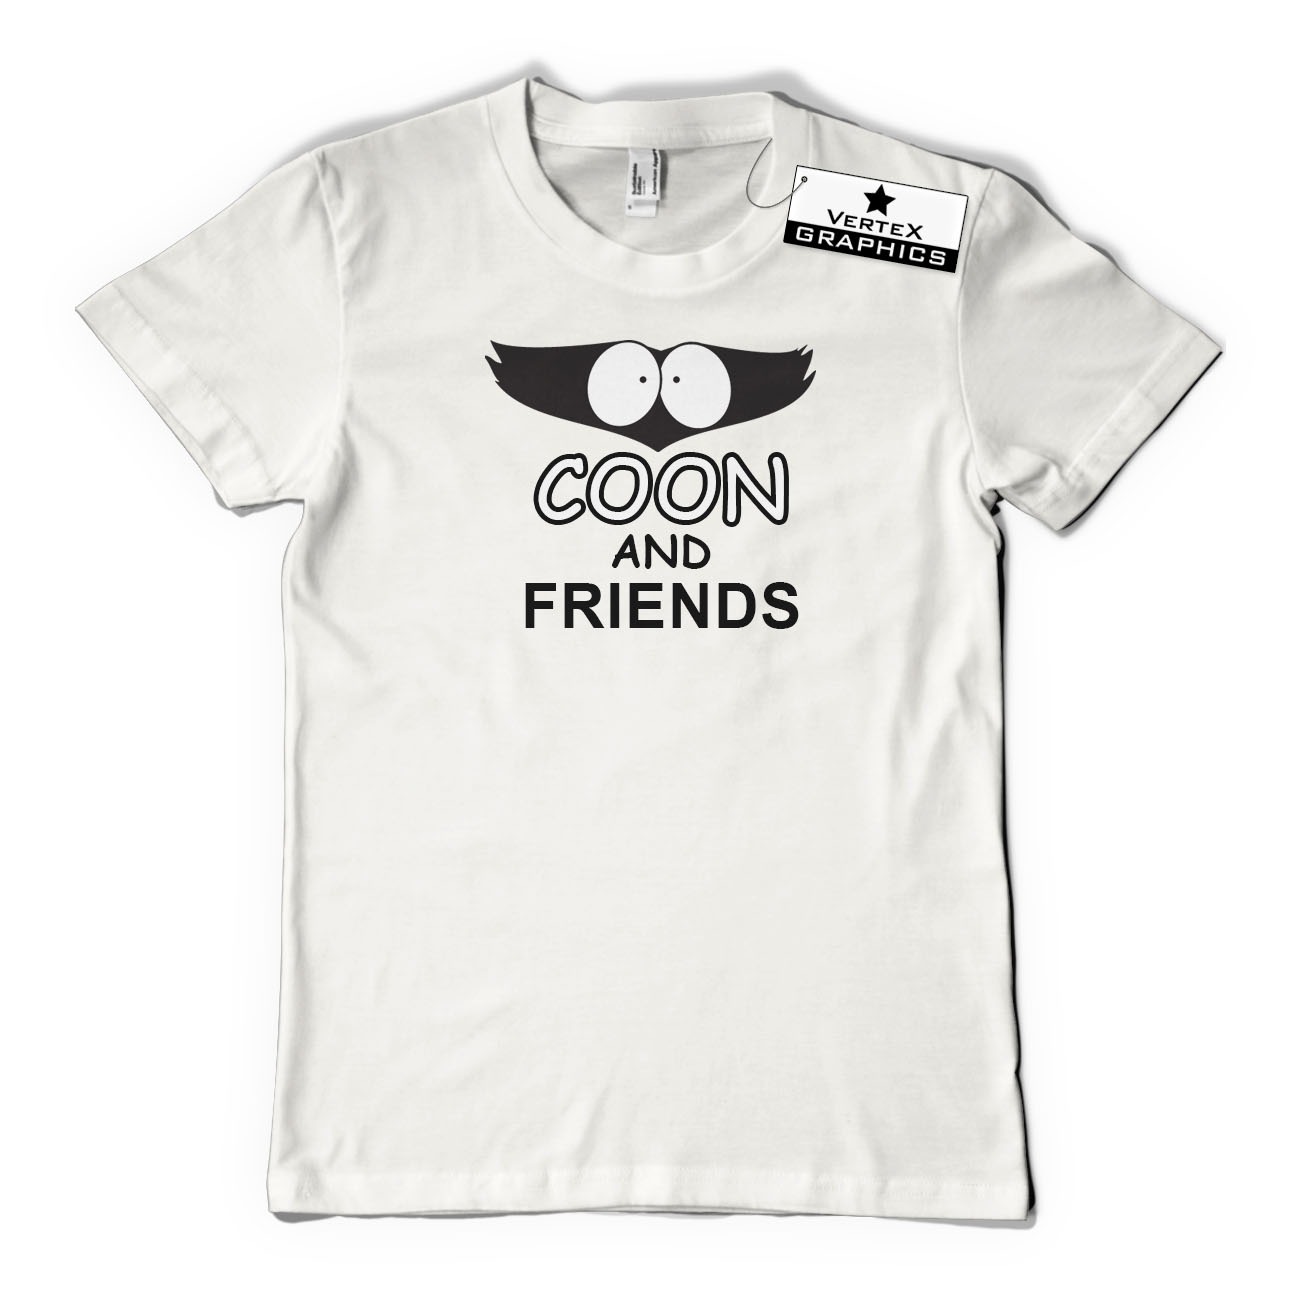 | South | Slogan, Coon T-Shirt Gift, eBay Funny, Friends Park, and TV